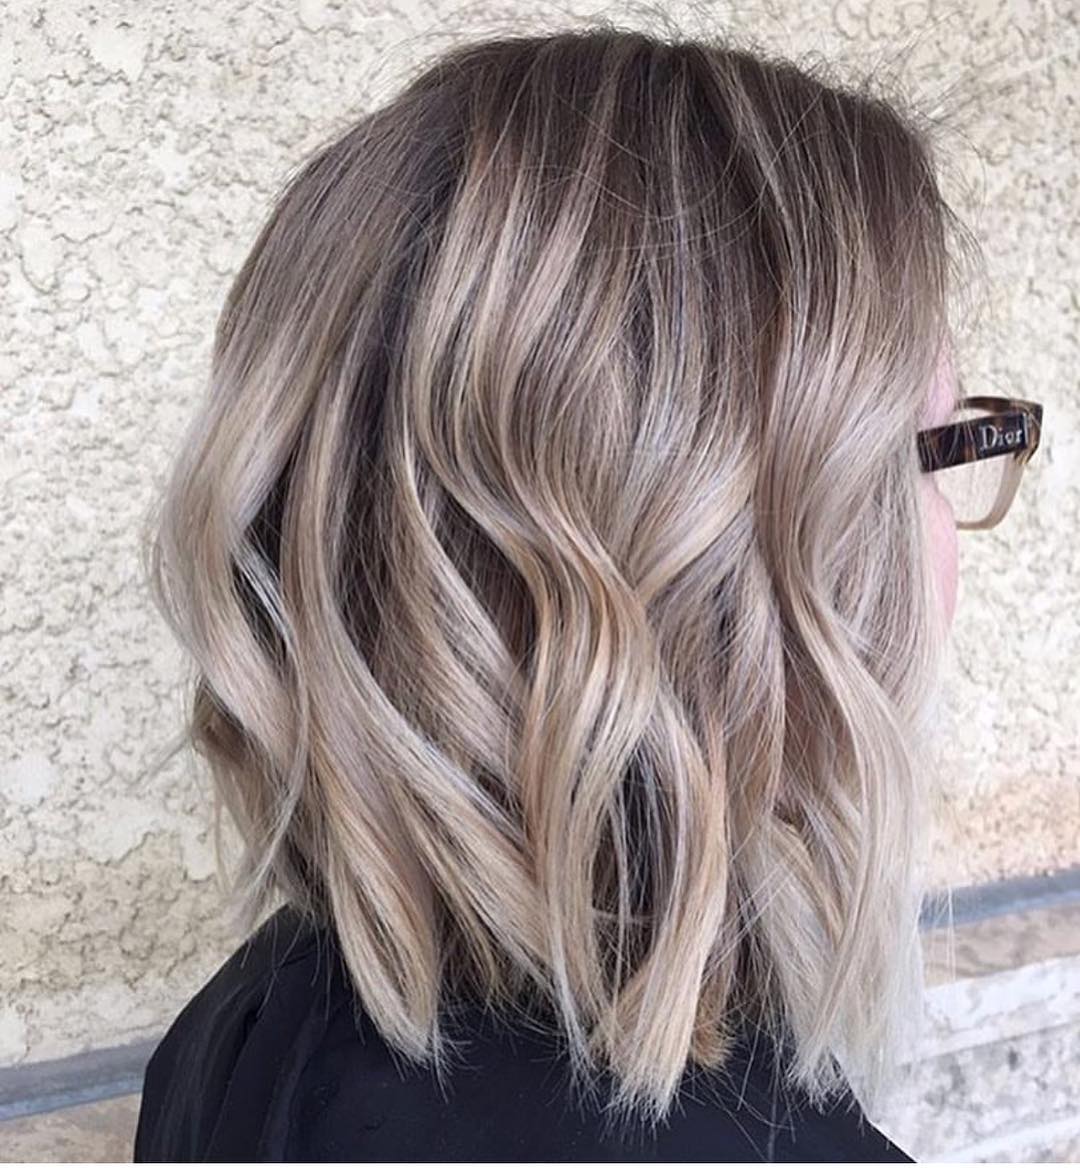 10 Balayage Ombre Hair Styles For Shoulder Length Hair Women